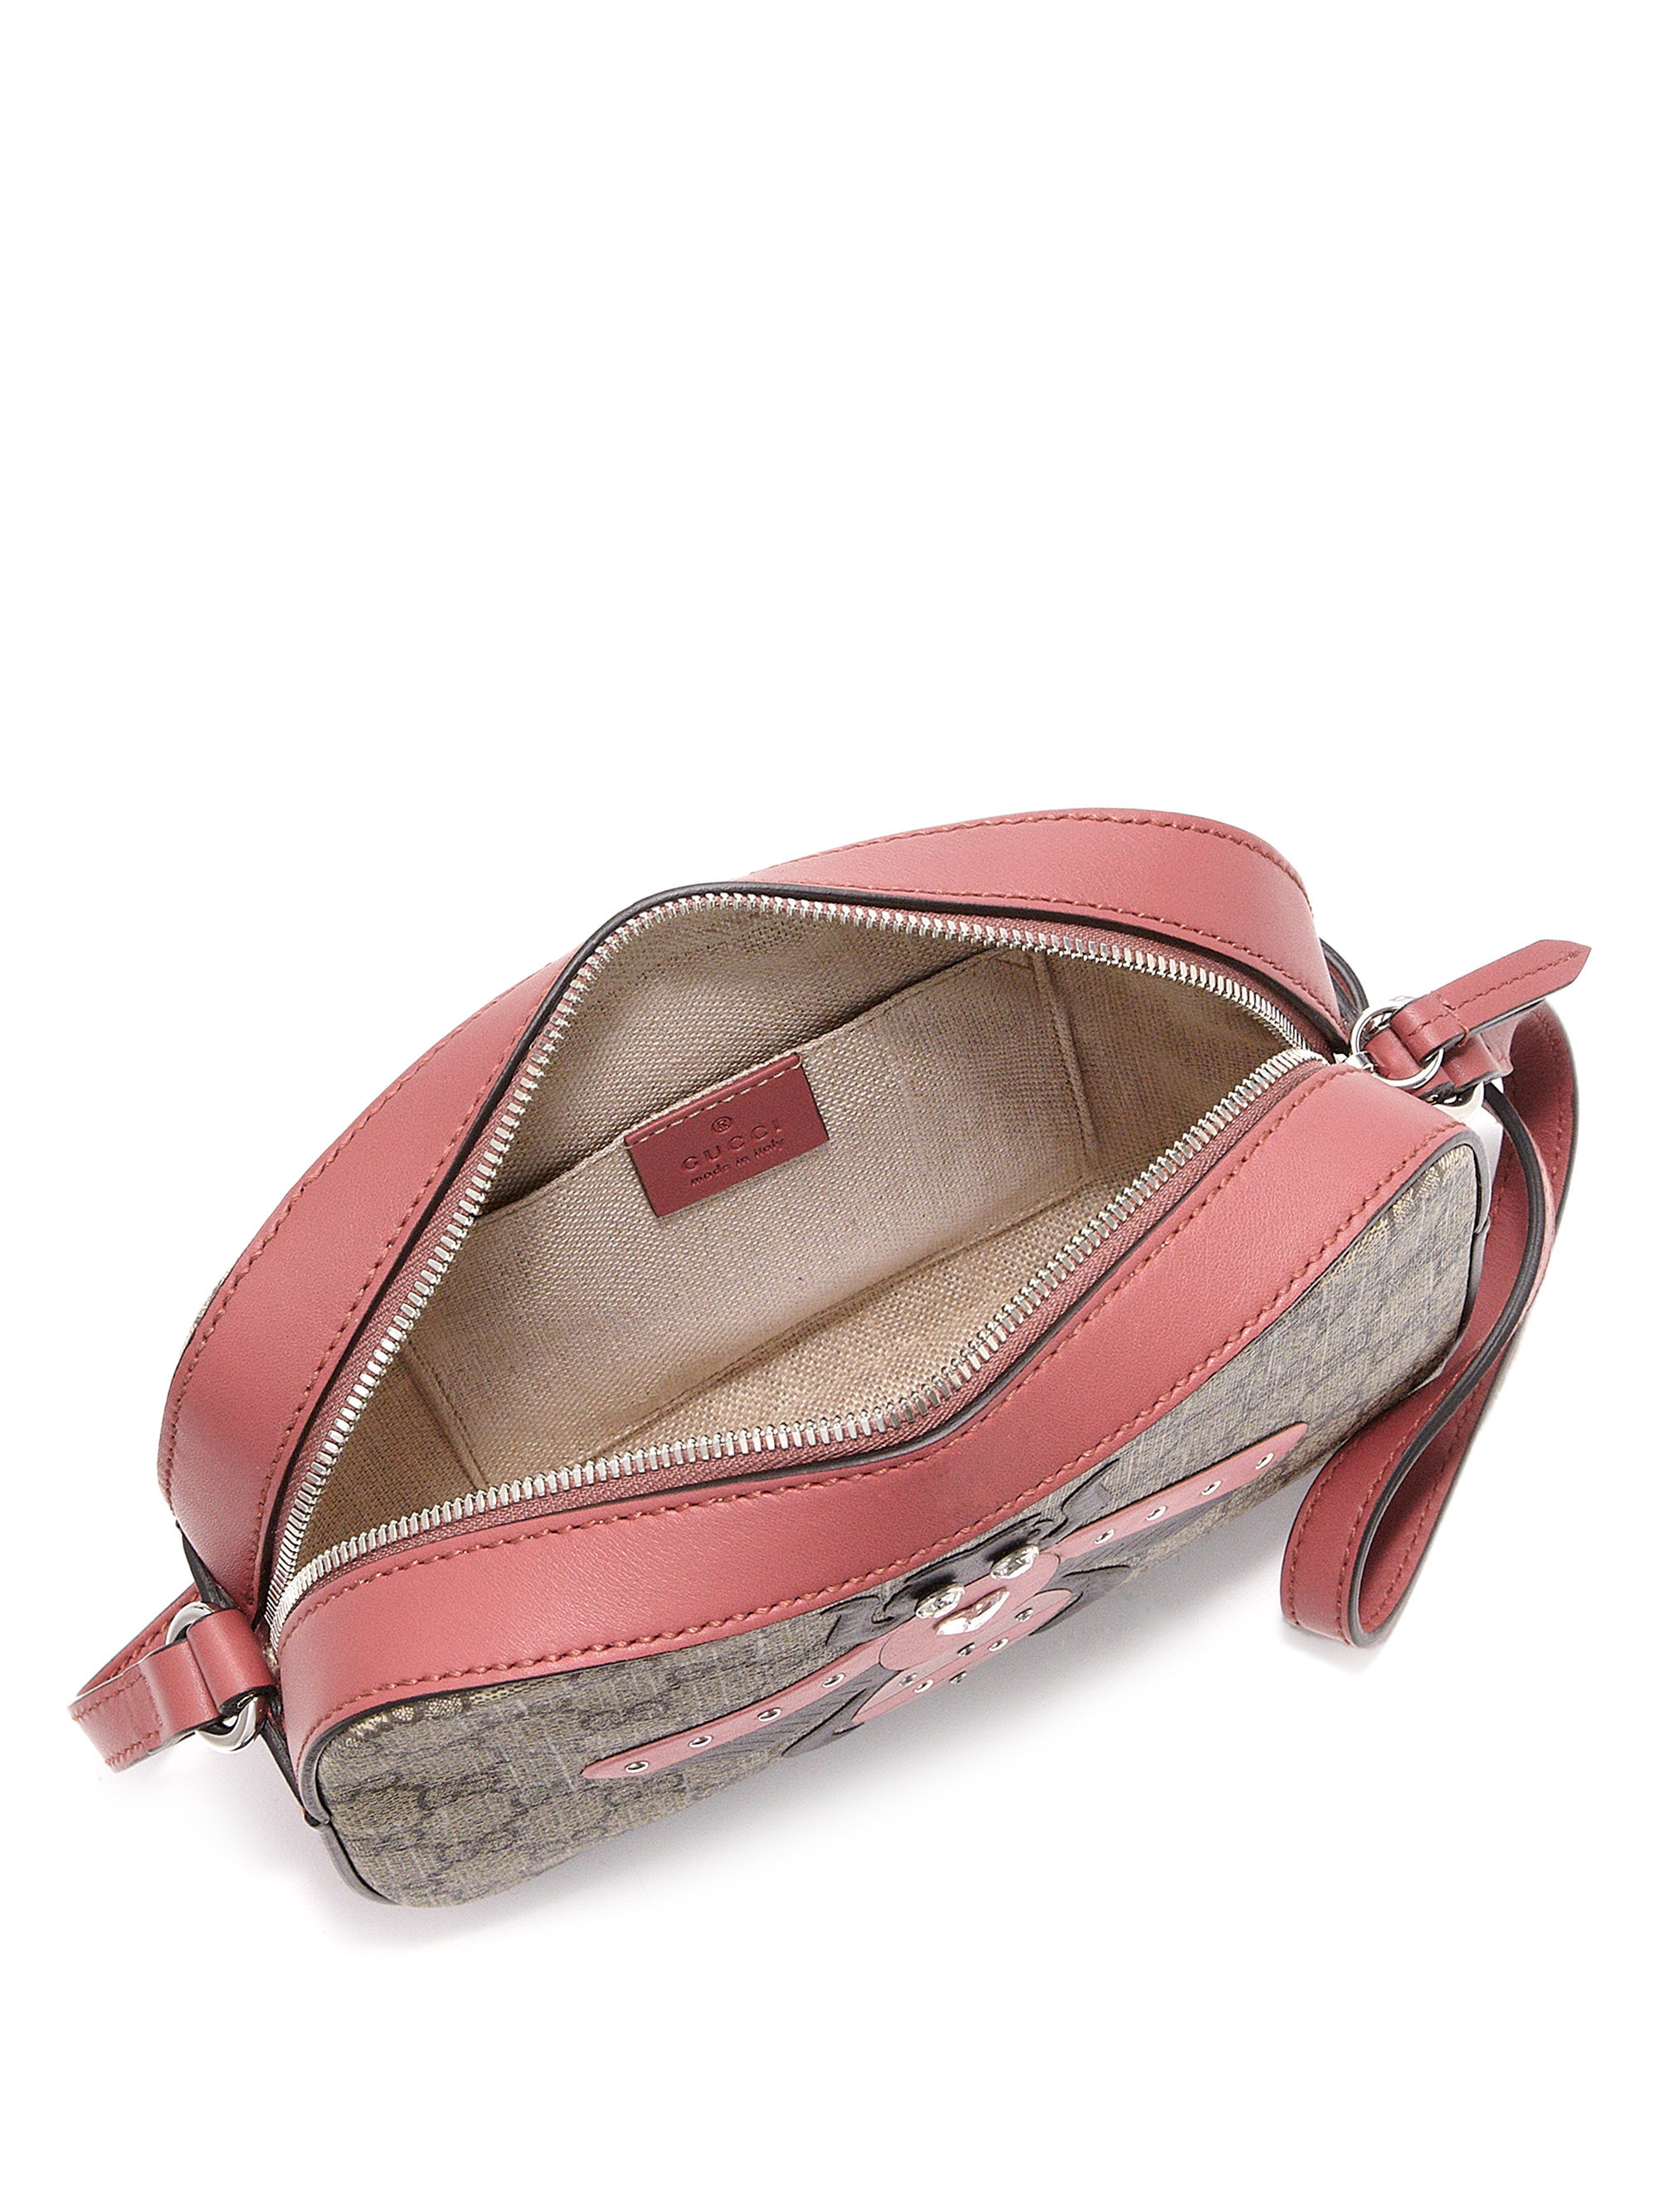 Gucci GG Supreme Bee Canvas And Leather Shoulder Bag in Rose-Beige (Natural) - Lyst